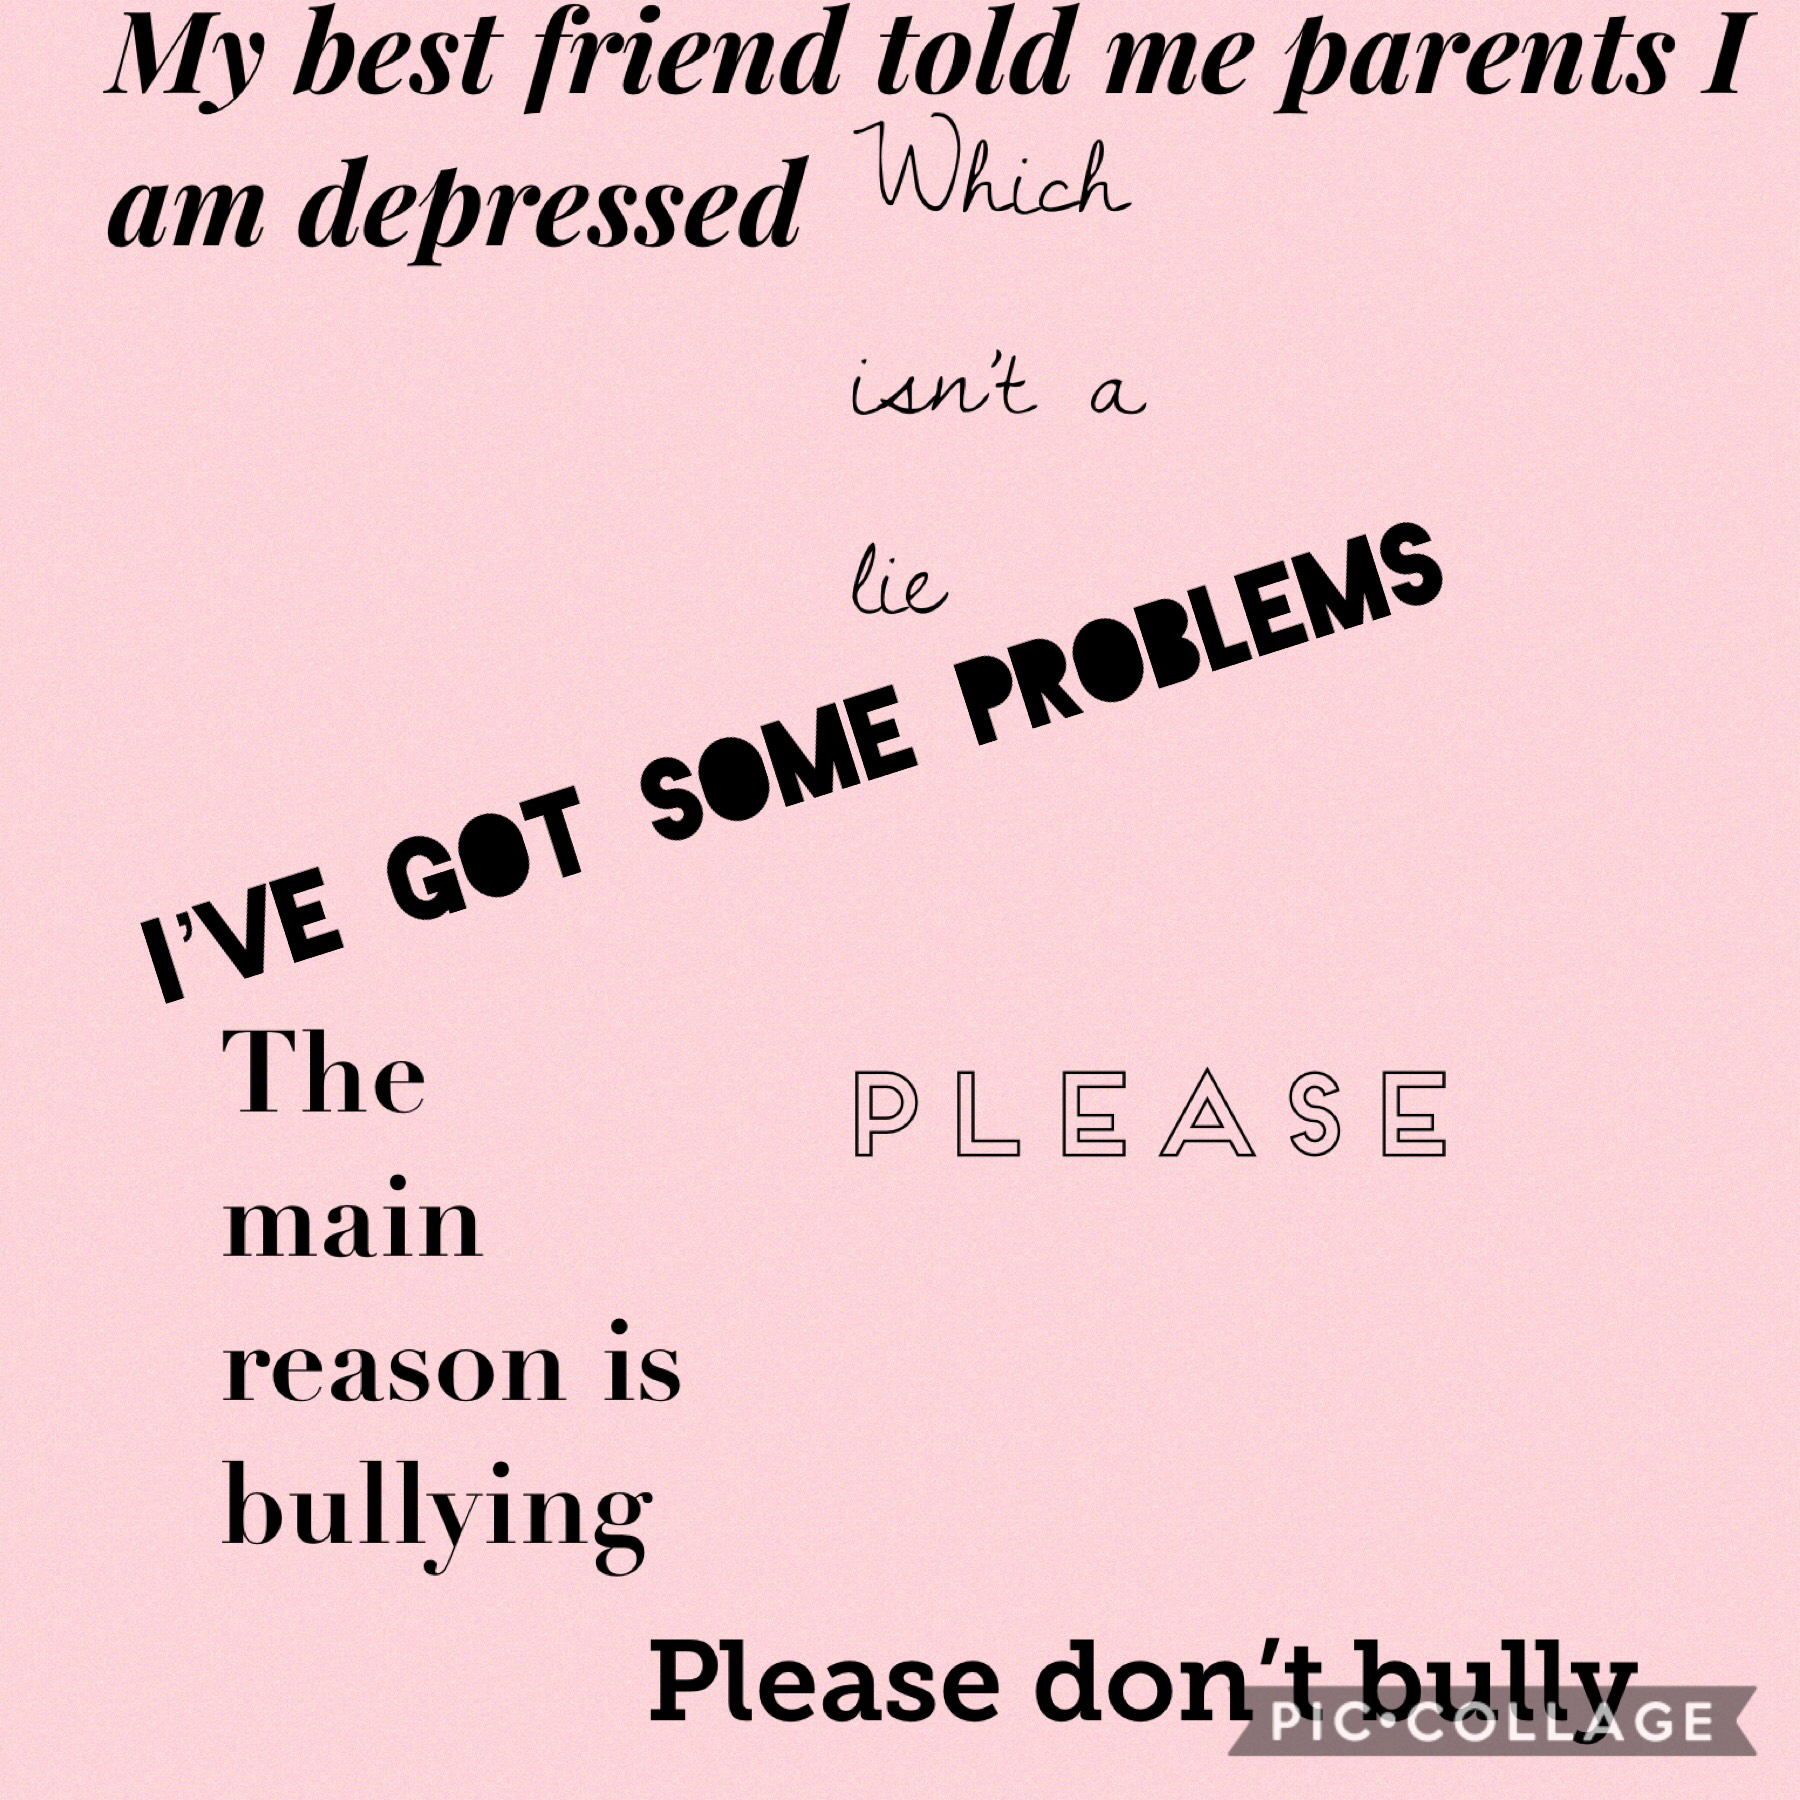 I cry a lot and at school I hide behind a fake smile. Please do not bully people.